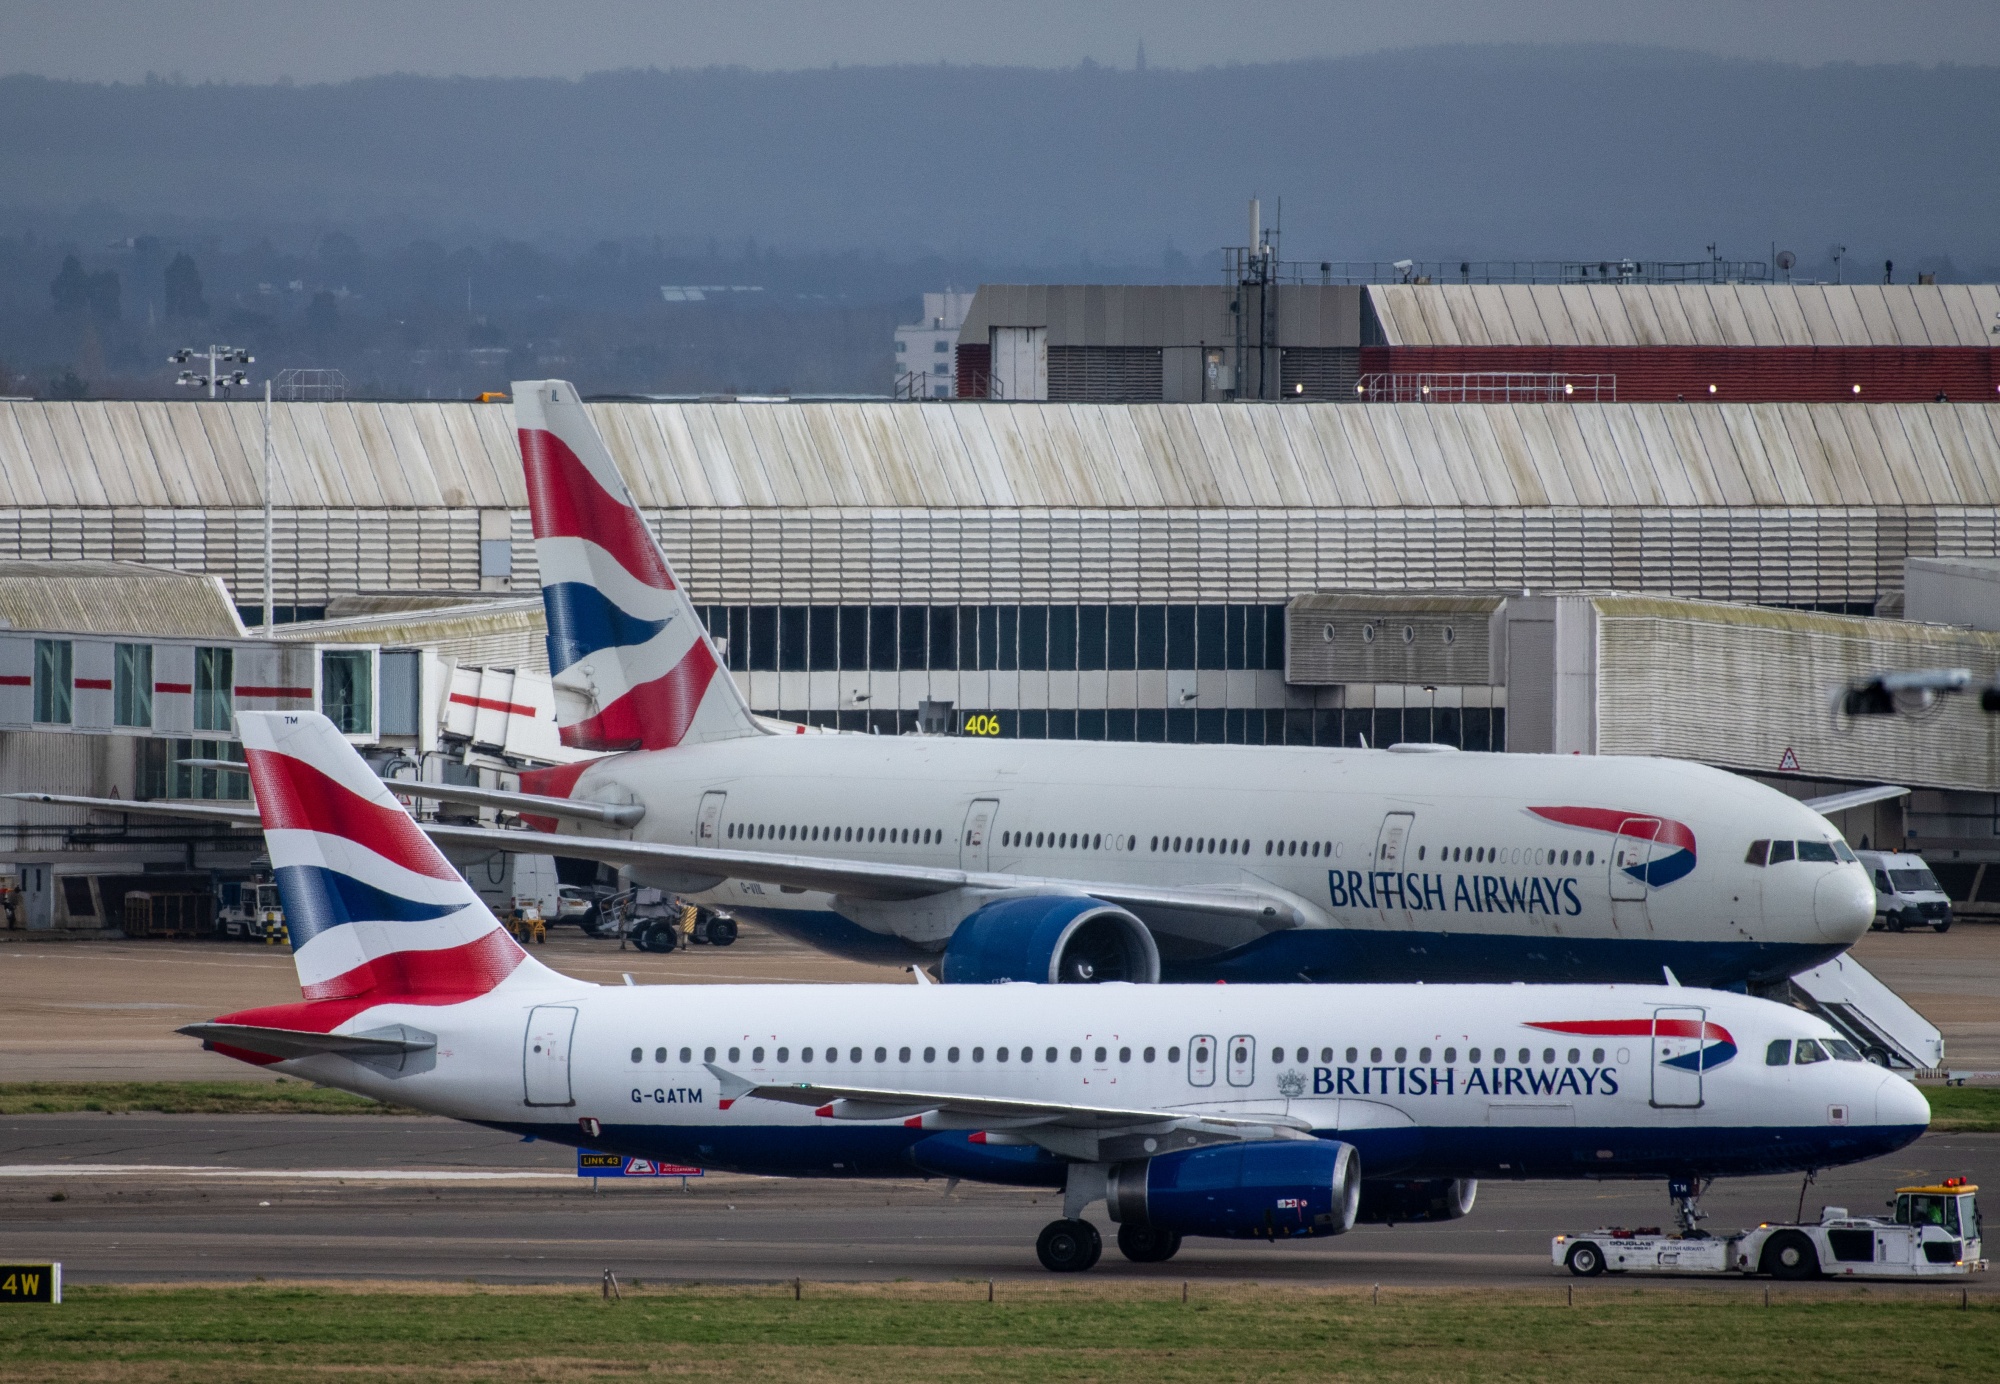 Passenger aircraft, operated by British Airways at London Heathrow Airport.